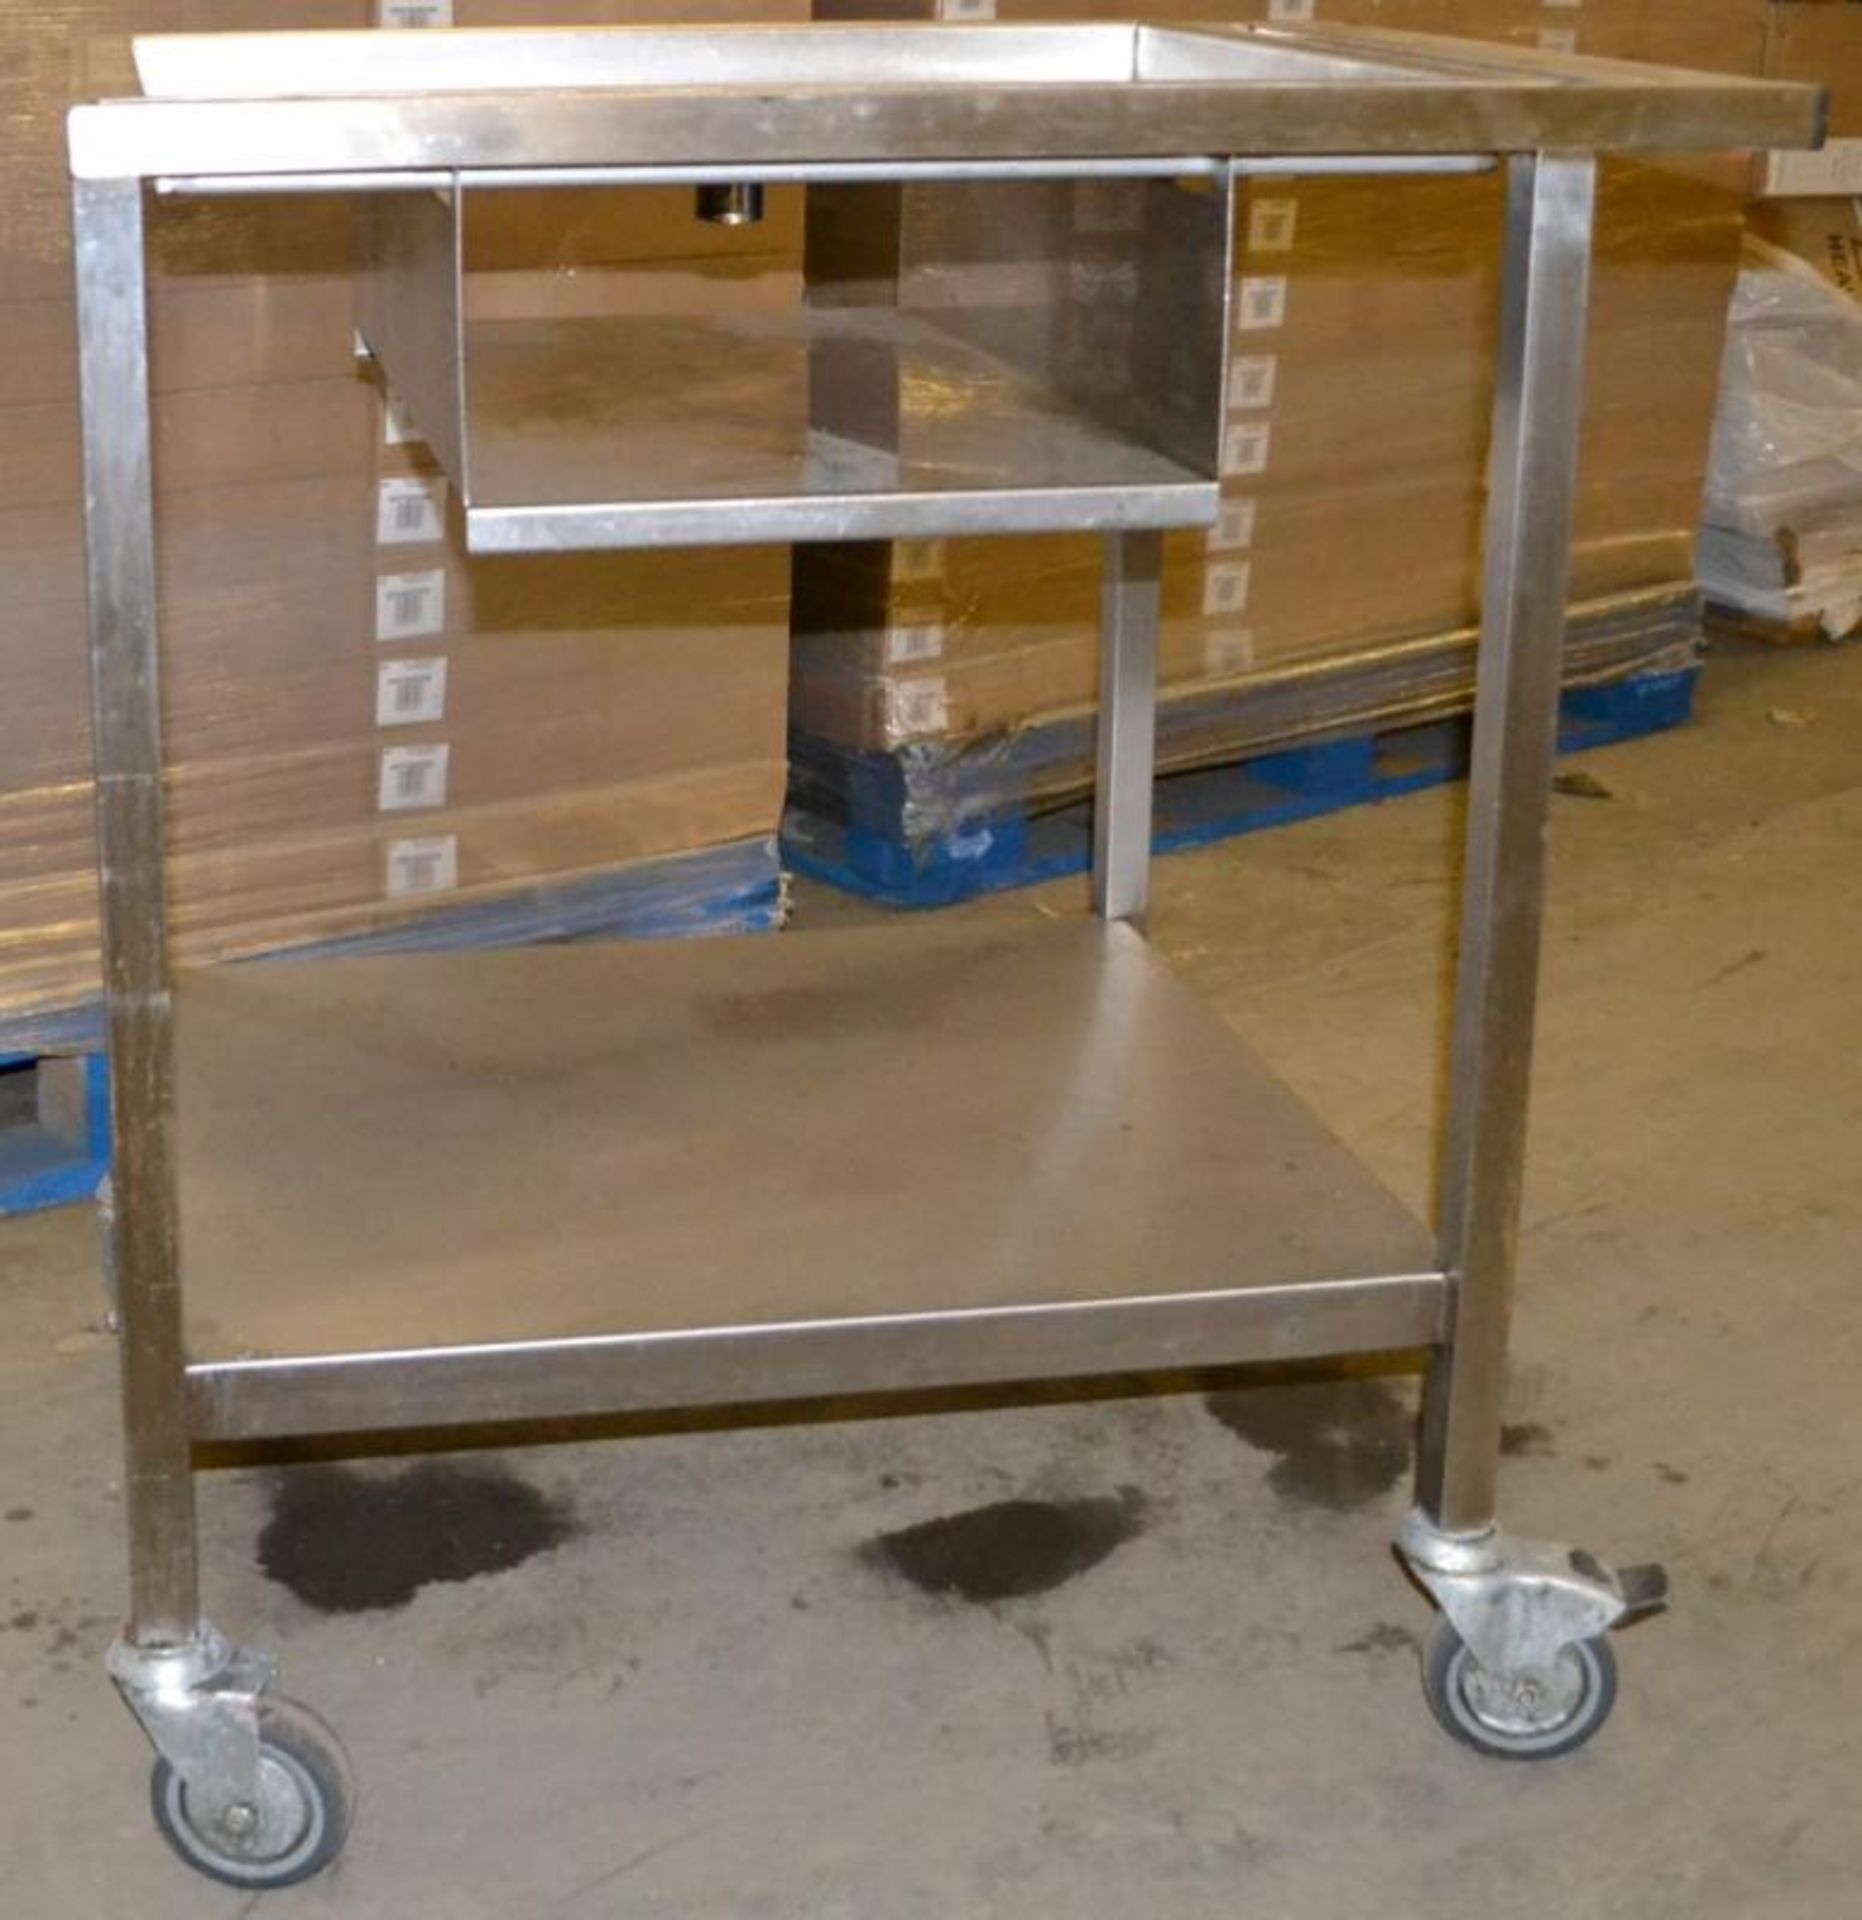 1 x Wheeled Stainless Steel Prep Bench with Drain Hole - Dimensions: 81.5 x 60.5 x 88cm - Ref: MC117 - Image 7 of 7